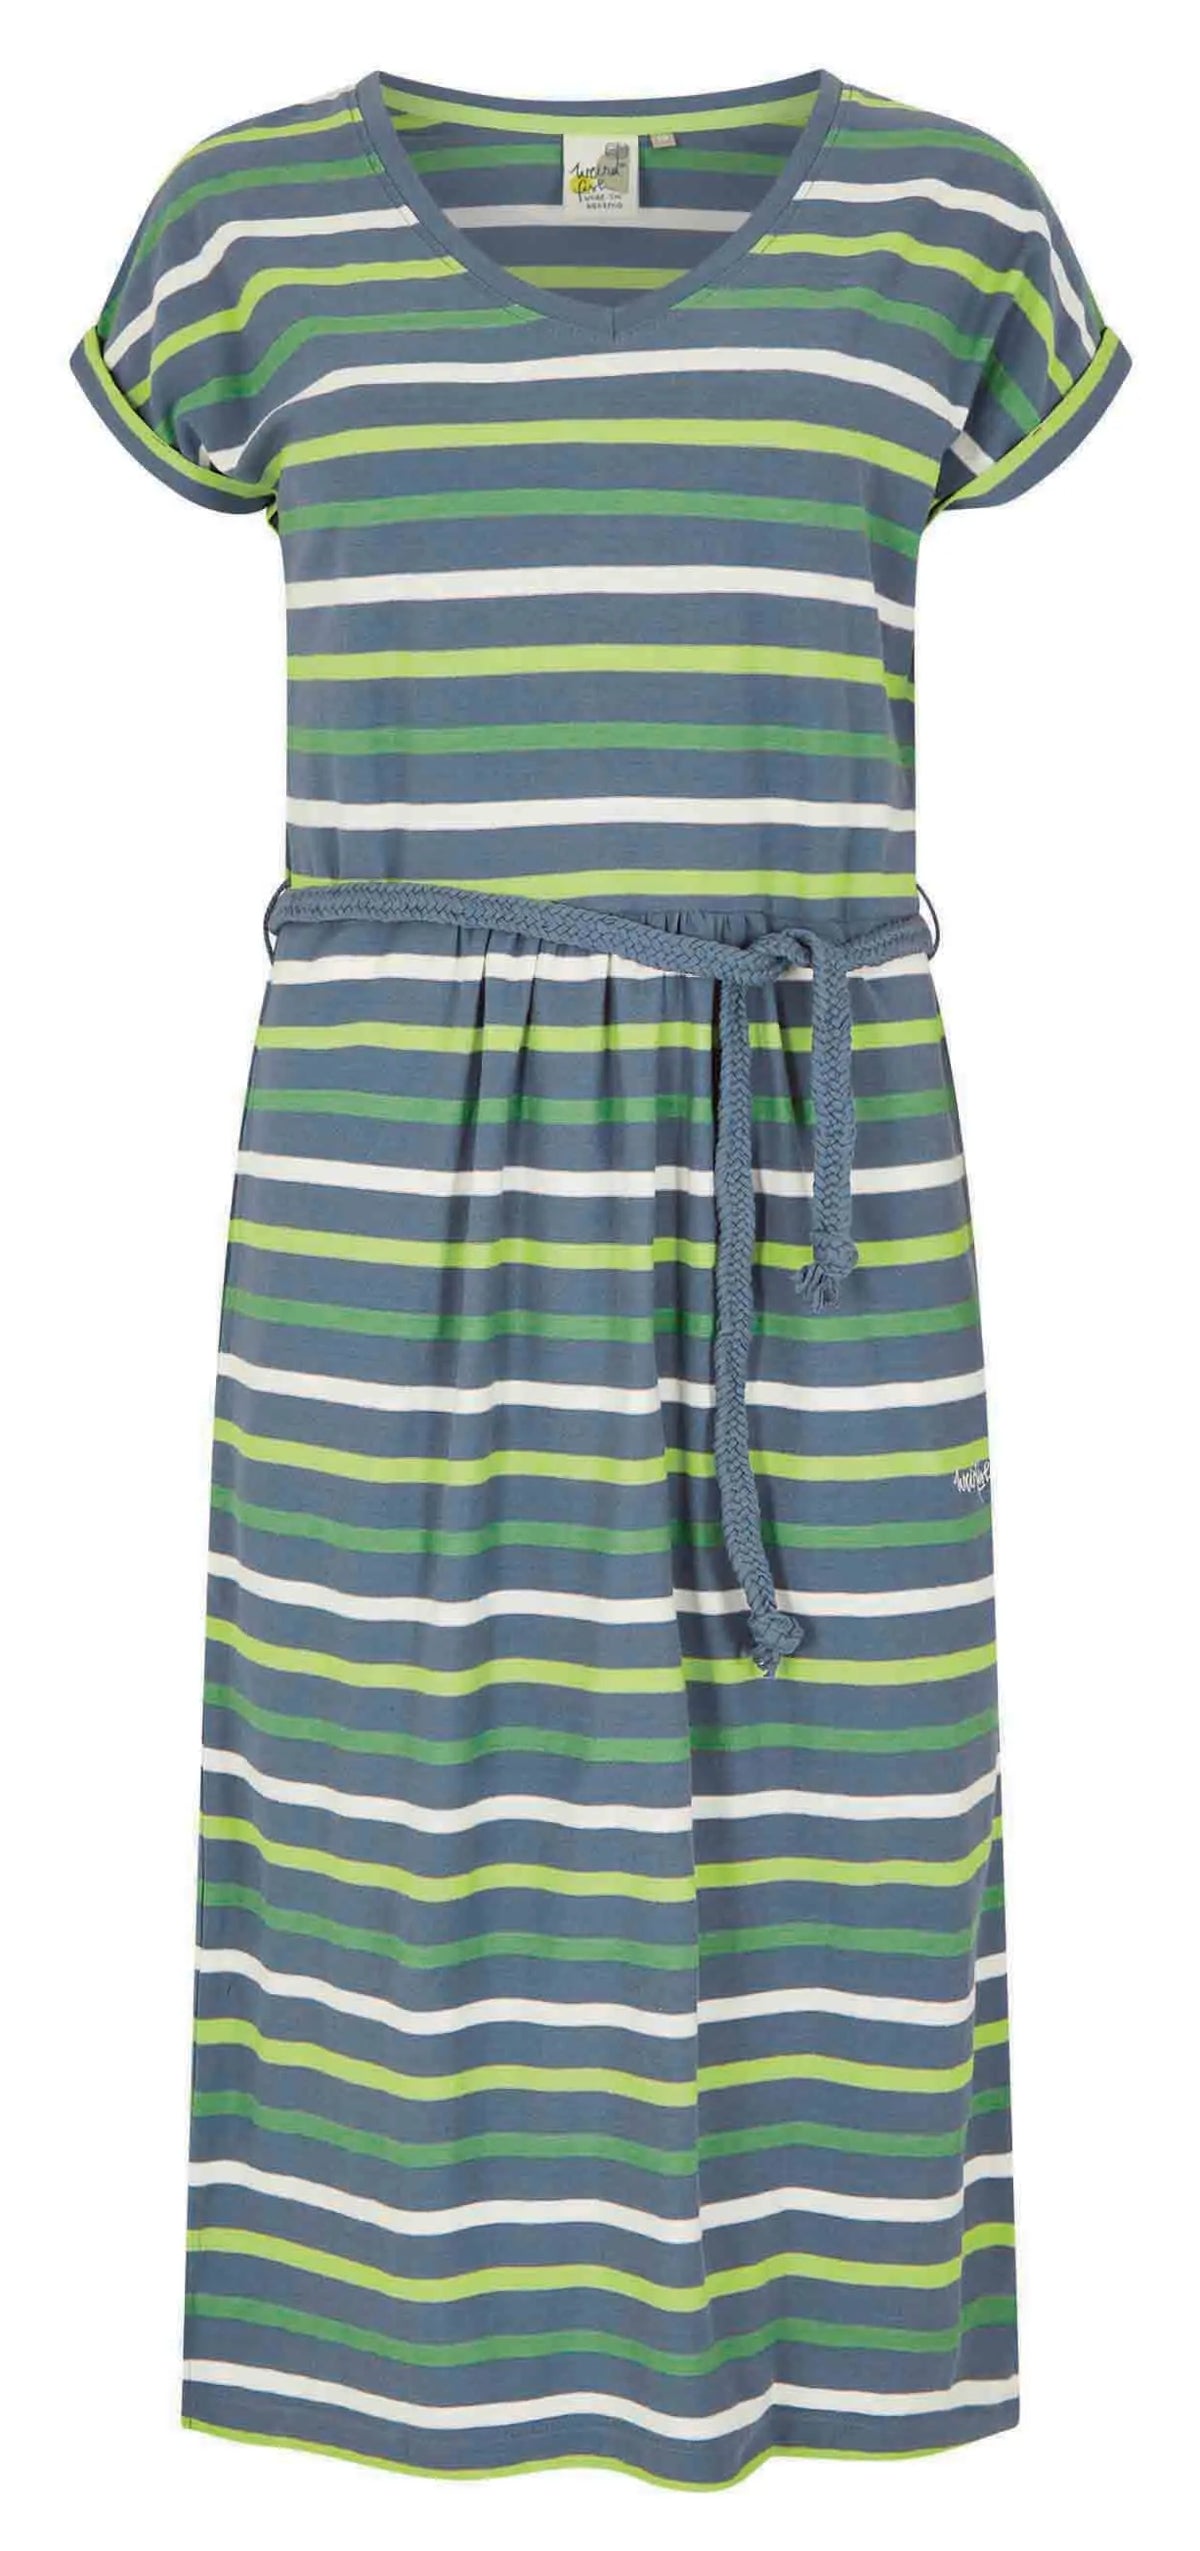 Women's Weird Fish Maliha stripe pattern jersey dress in China Blue and Green with short sleeves, v-neckline and tie waist.